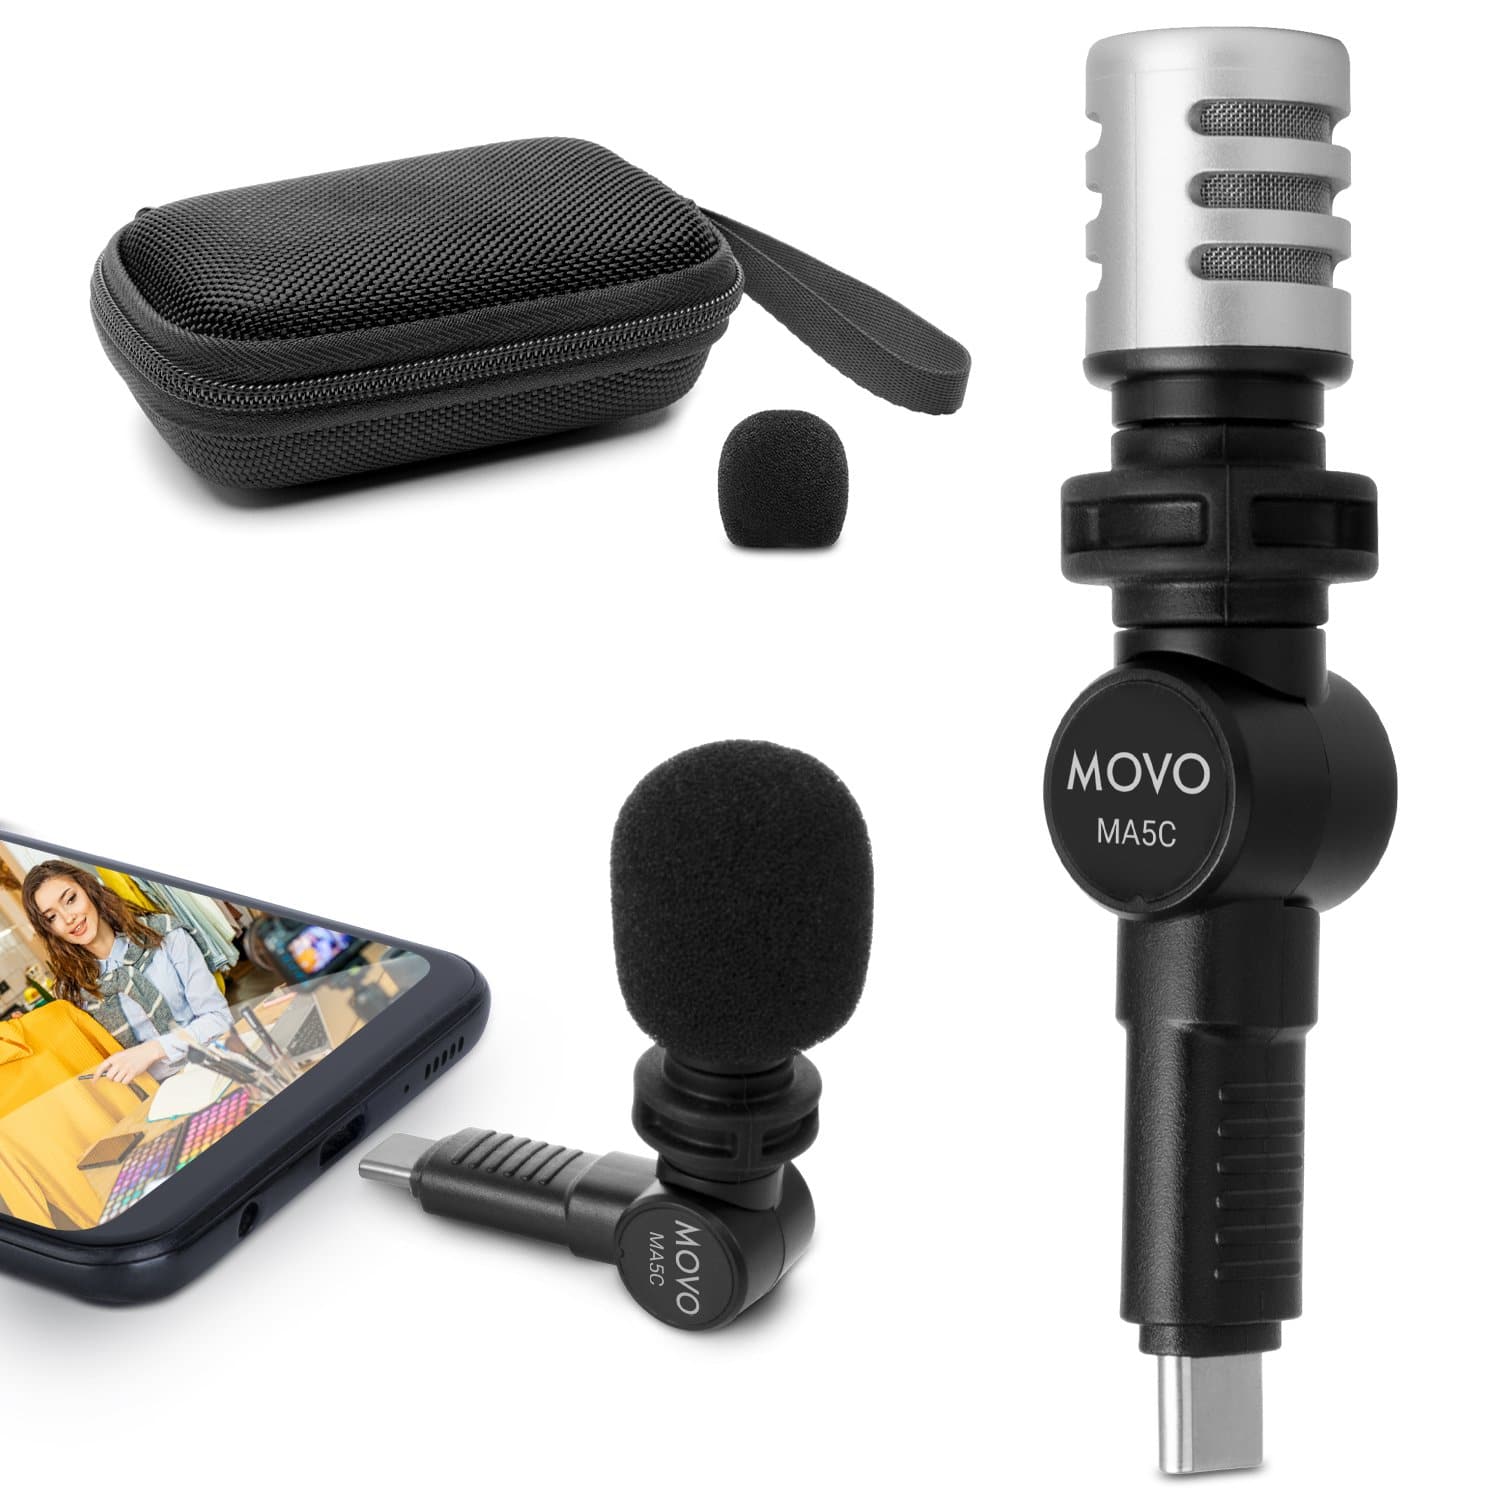 MA5C | Mini Microphone USB-C Android Smartphones + Tablets | Movo